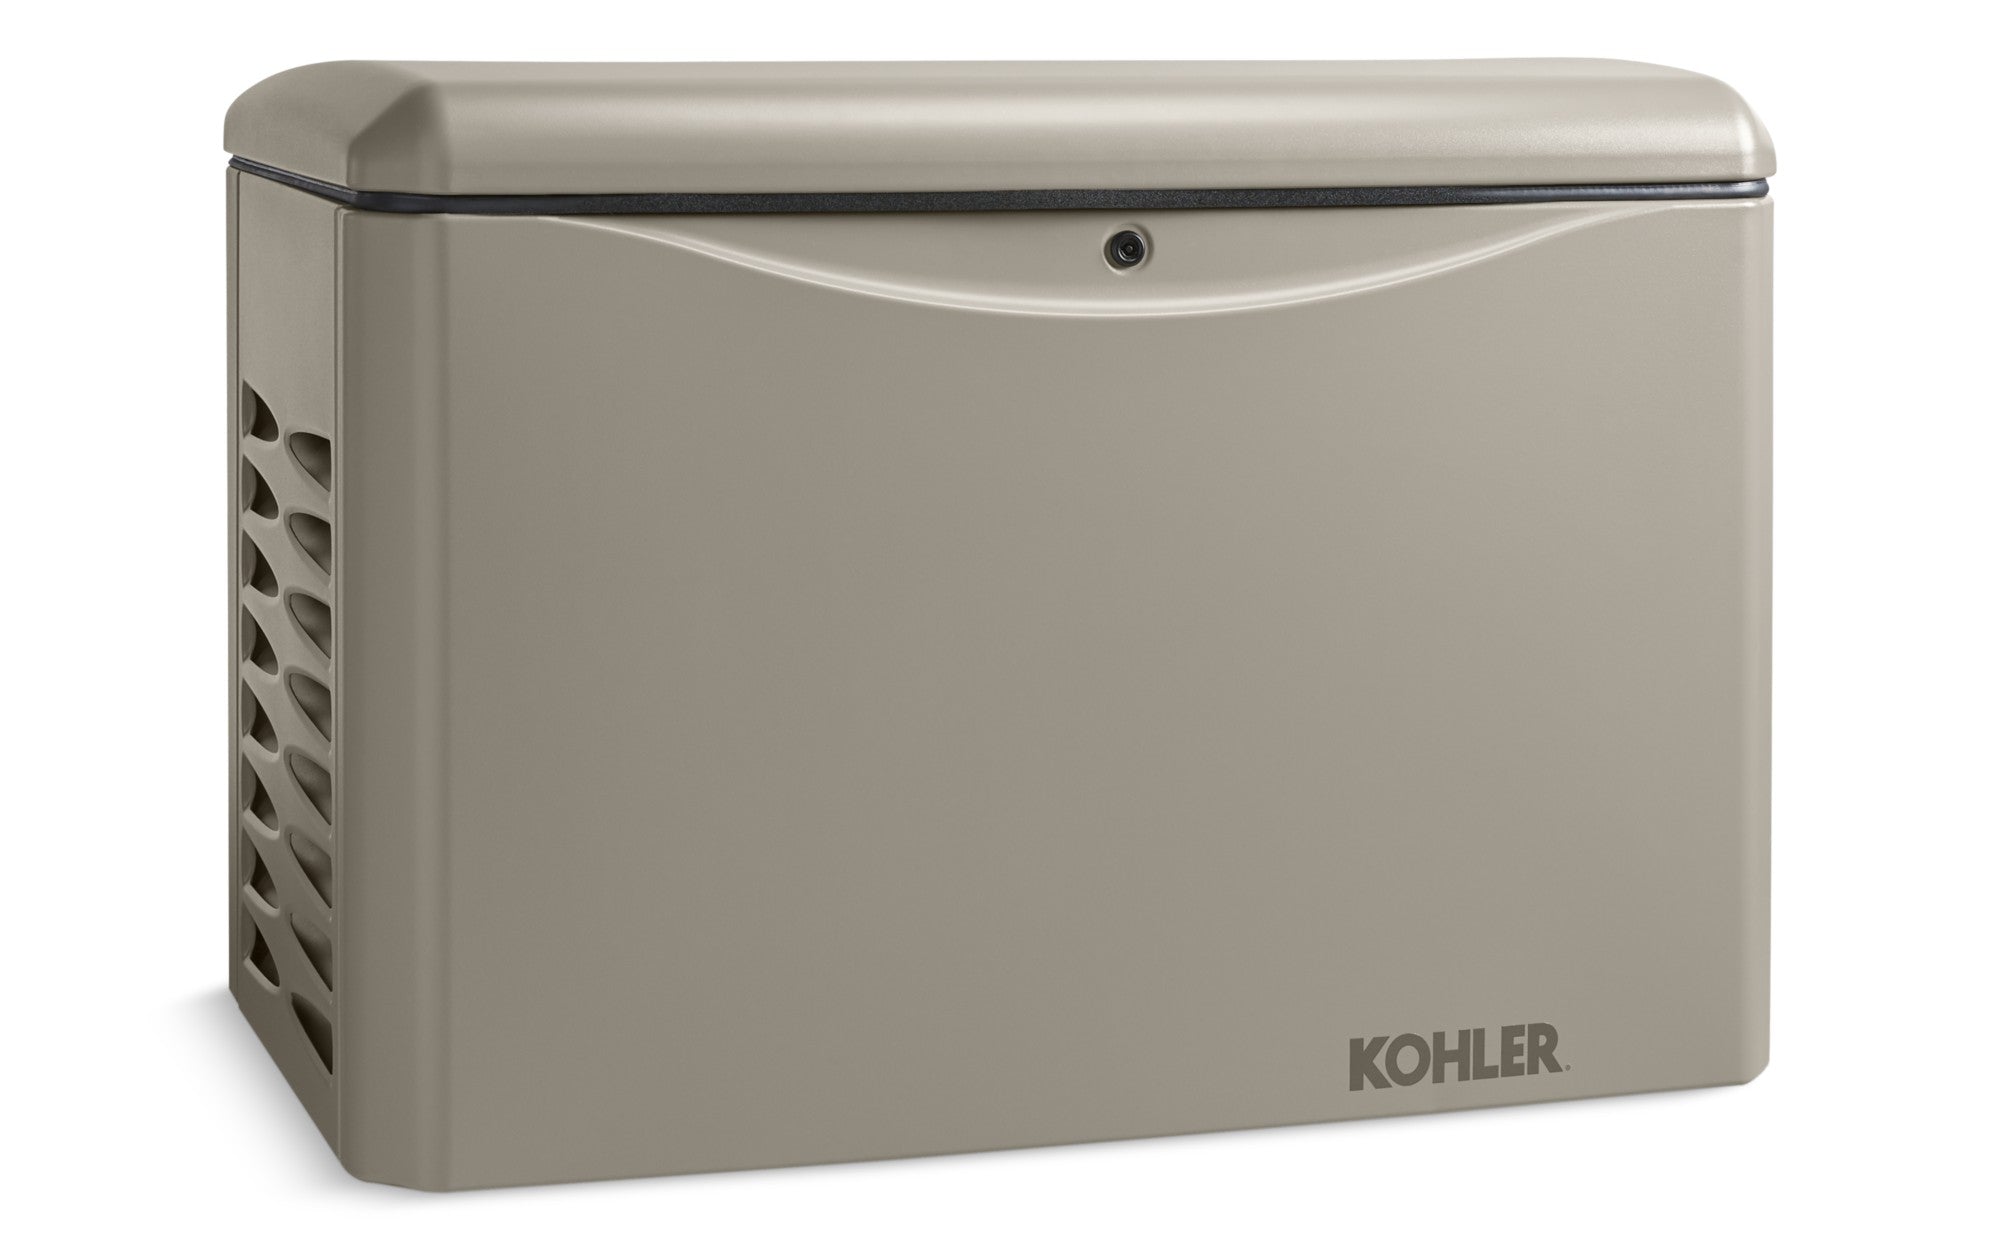 Kohler 26RCA-QS50 Standby Generator 26KW 120/240V Single Phase with Cold Weather Kit New